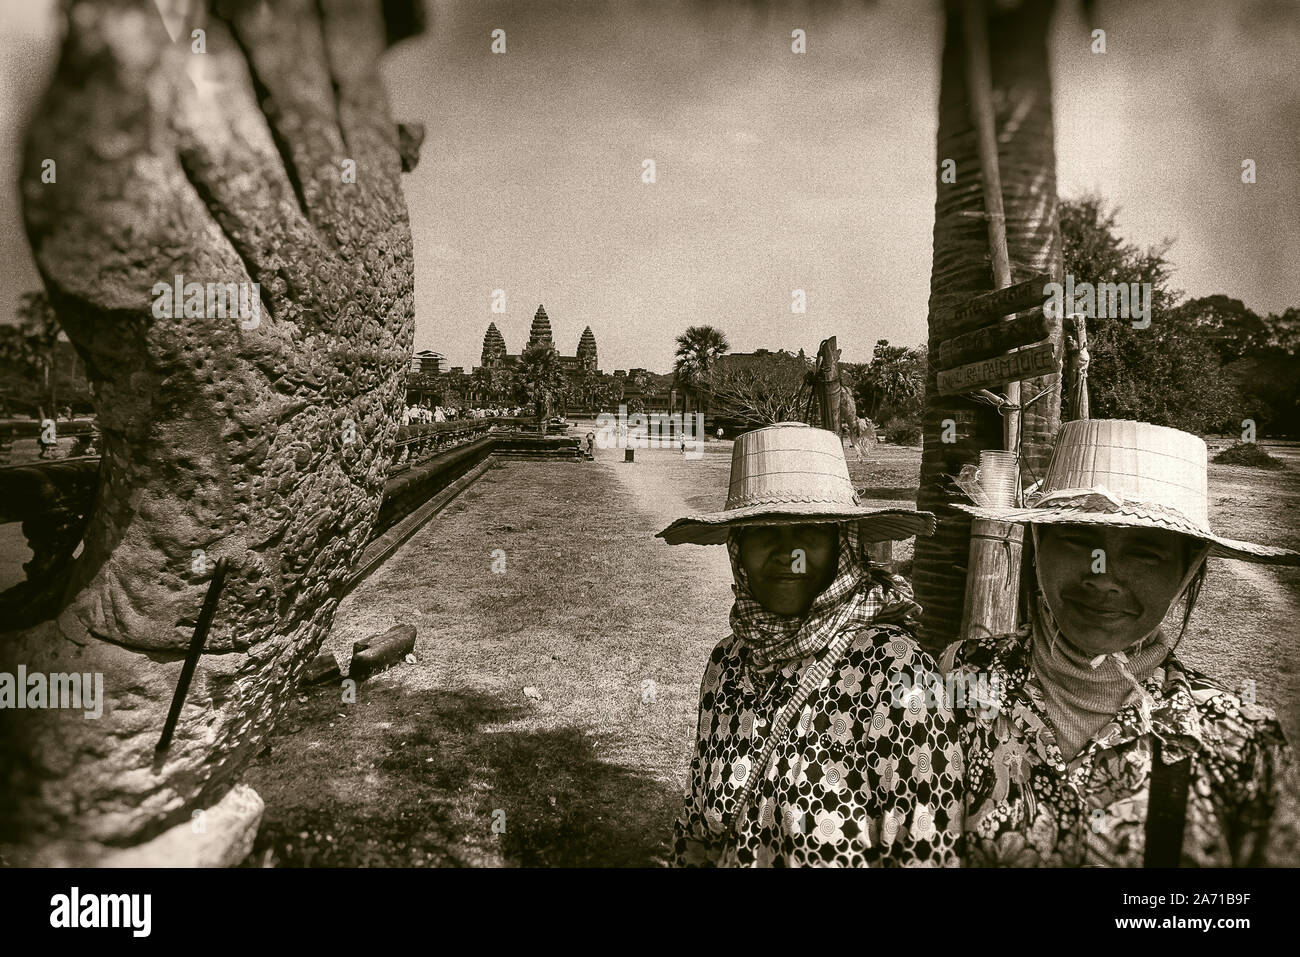 Cambodia, Angkor Wat: portrait of two women selling palm juice, along the driveway to Angkor Wat. Stock Photo